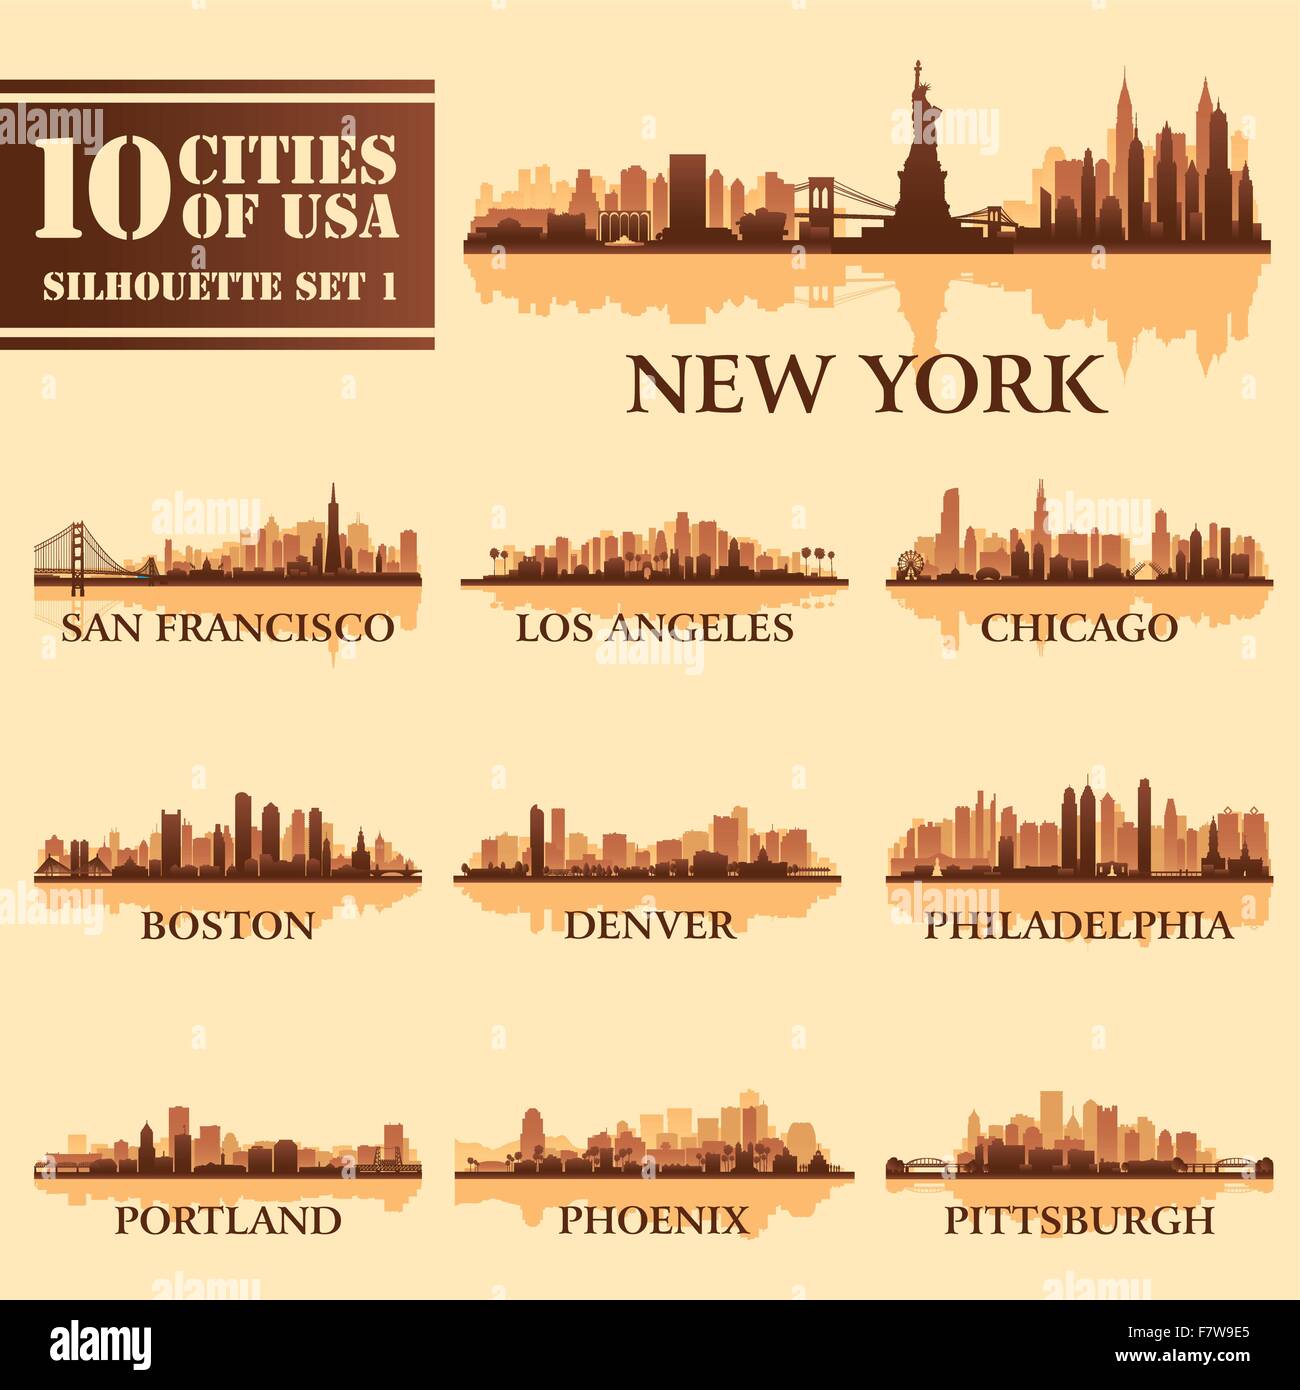 Silhouette city set of USA 1 Stock Vector